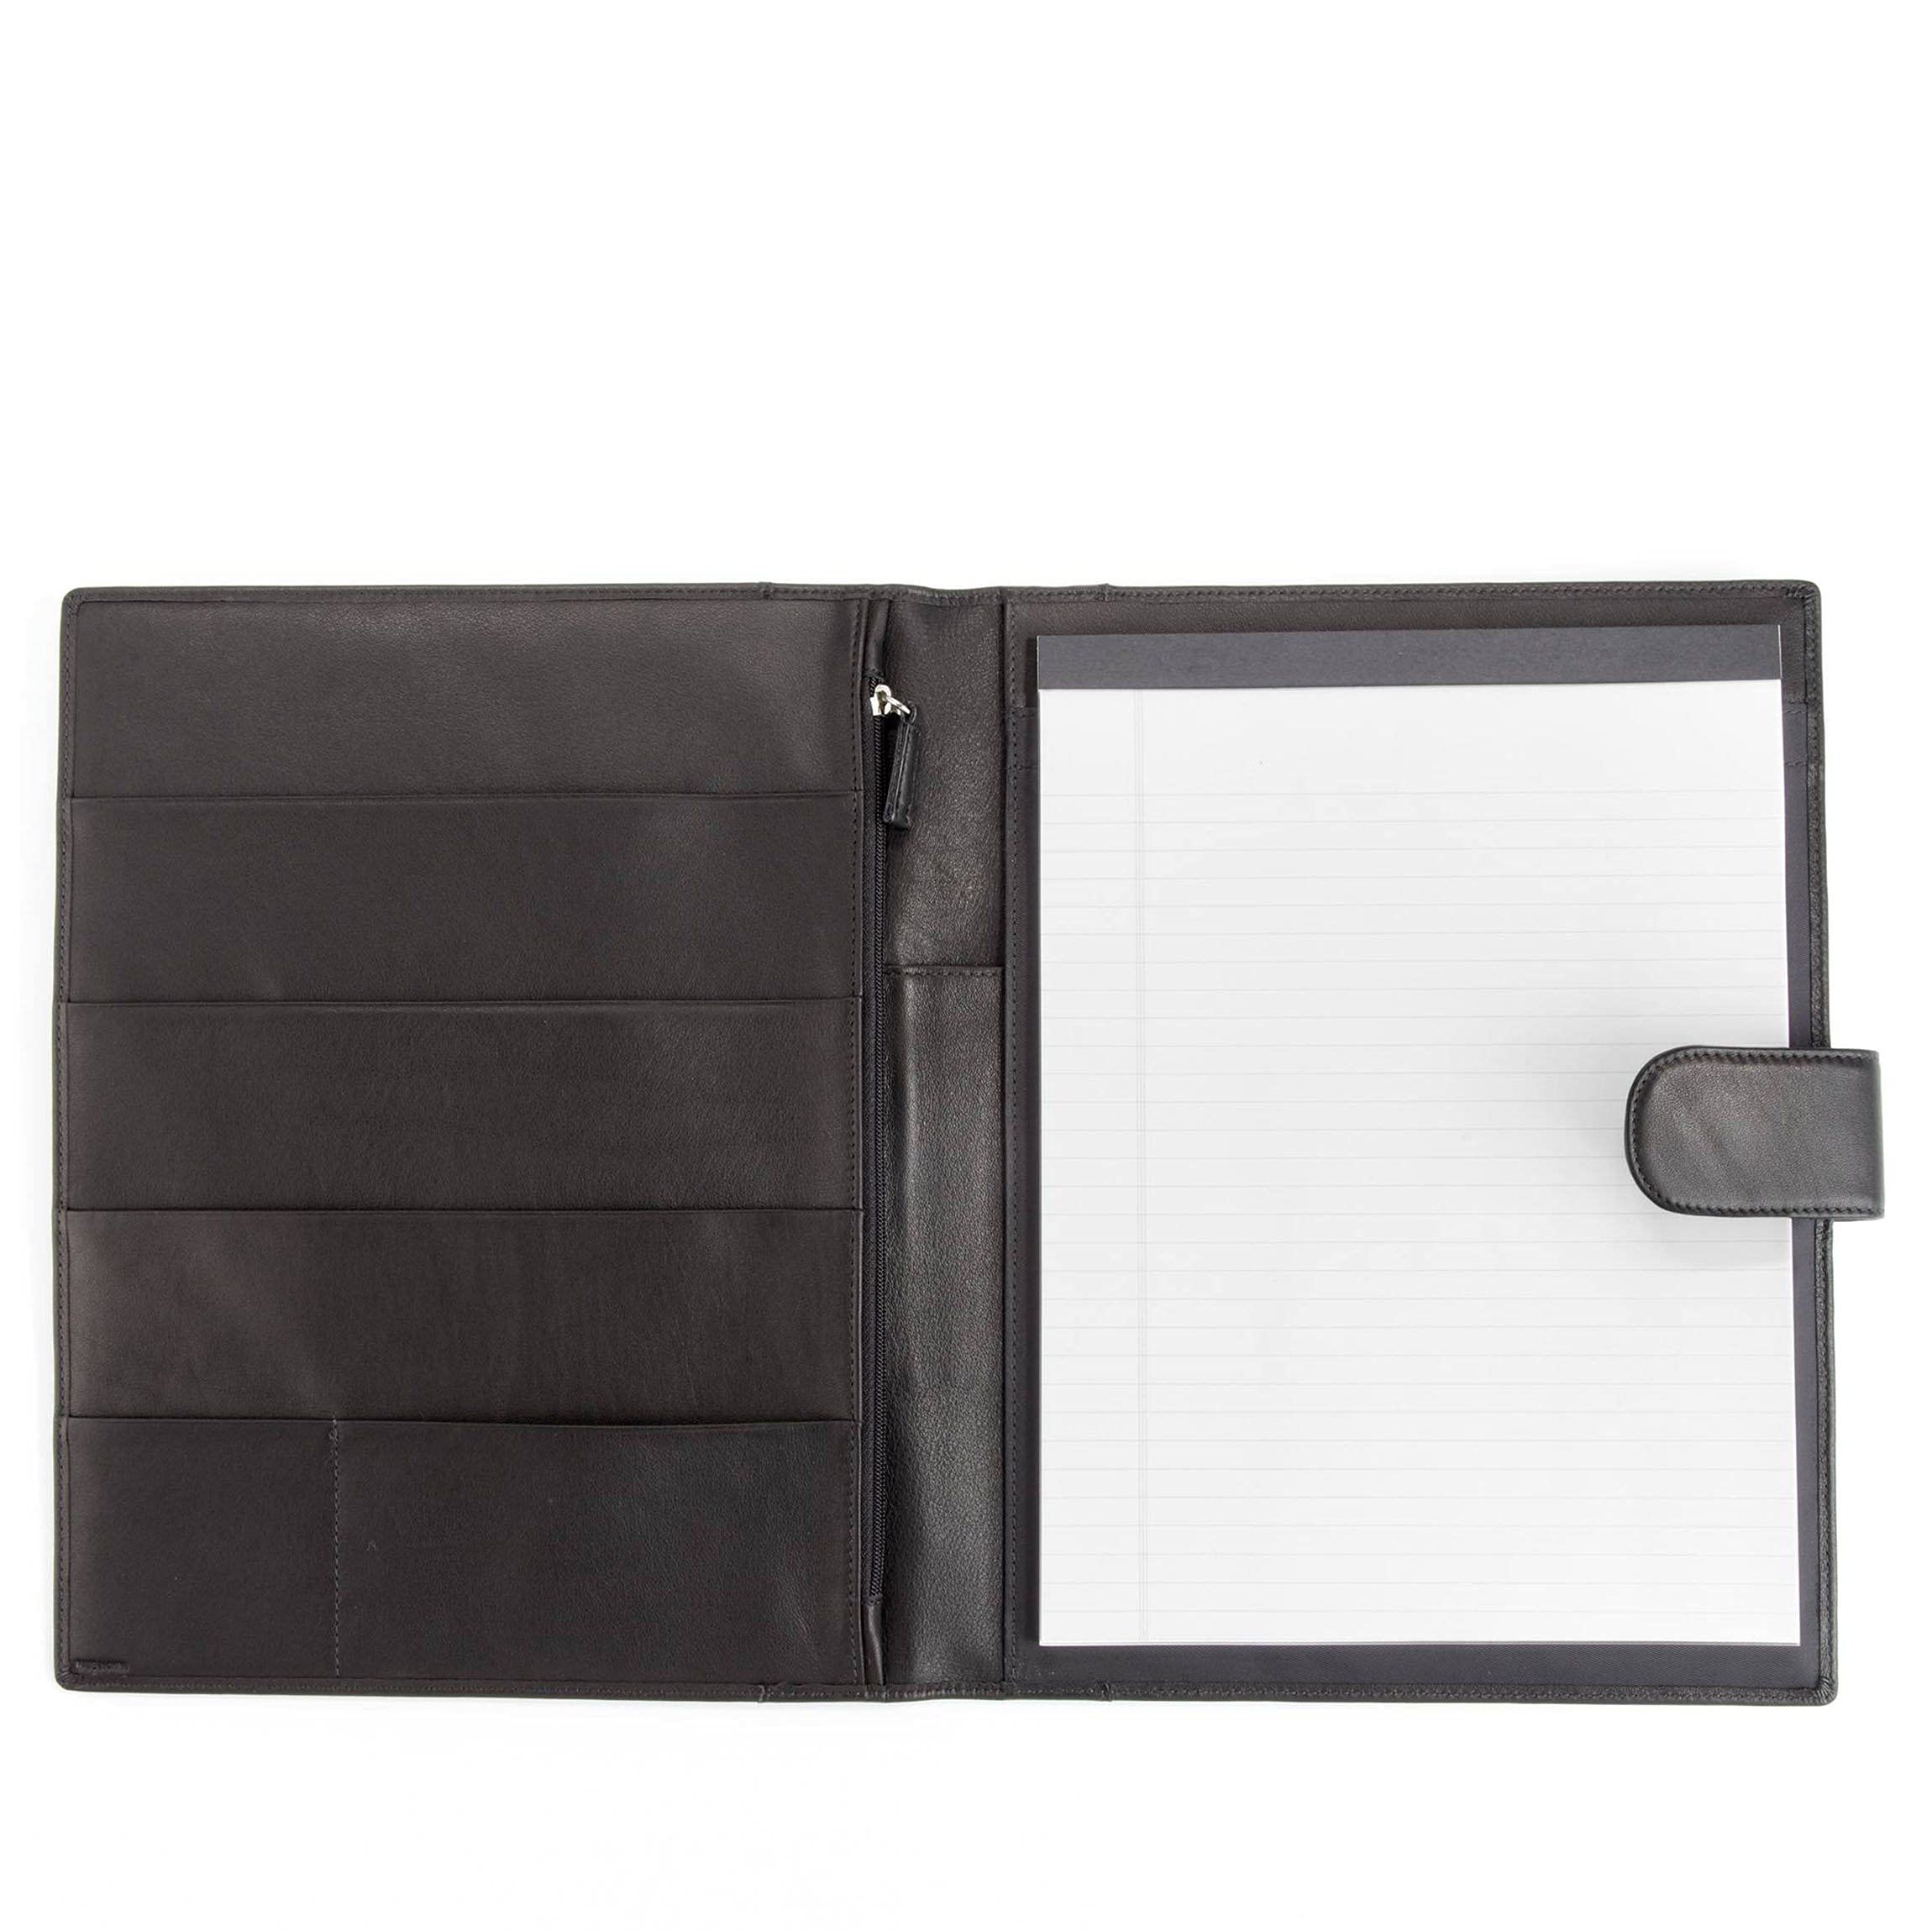 Leatherology Black Onyx Portfolio A4 Organizer with Tablet Pocket, Magnetic Closure, Full Grain Leather